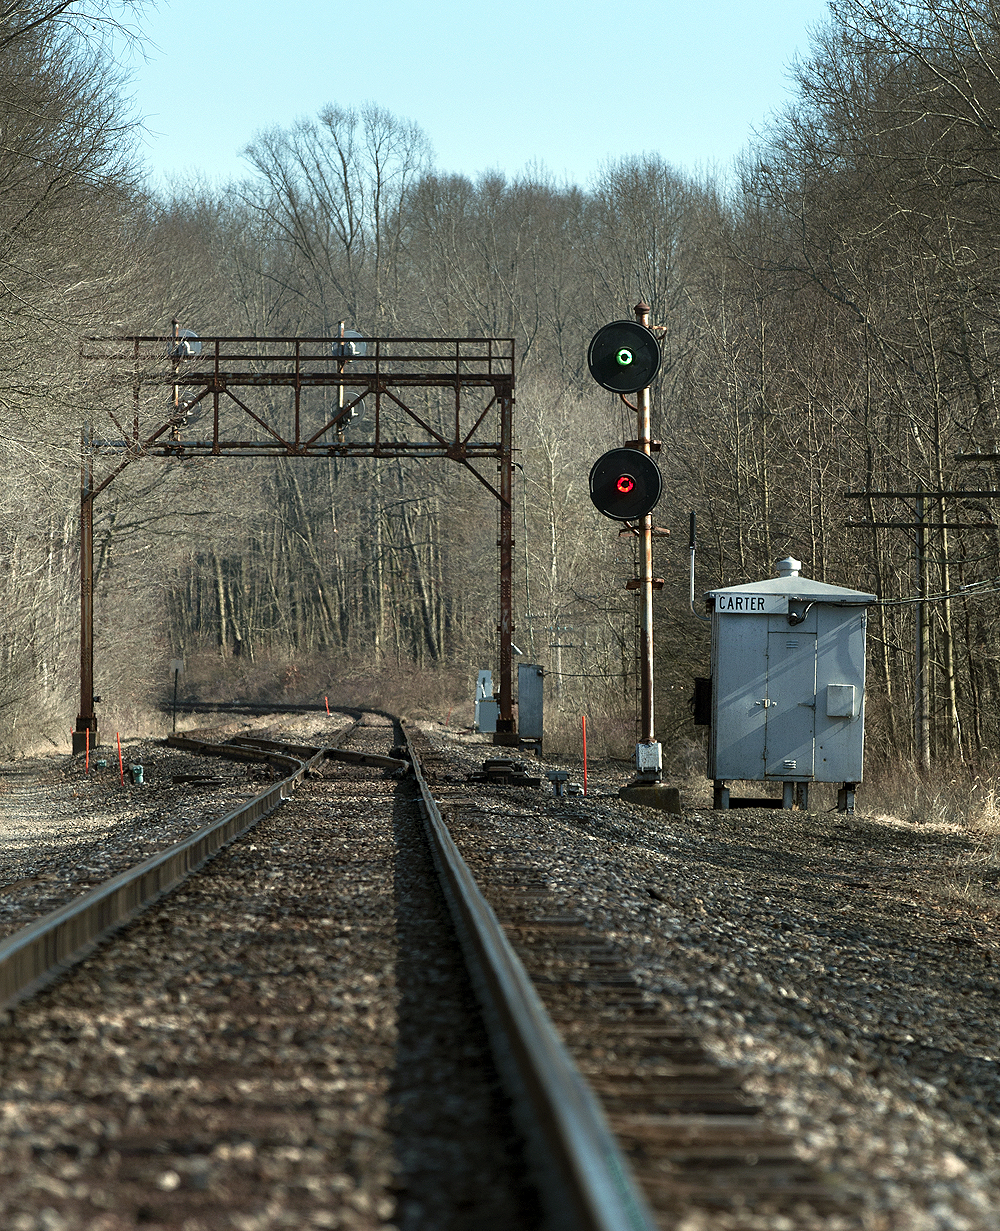 Track runs off into the distance with a switch to the left for a siding as a searchlight signals shows a green light above a red light.